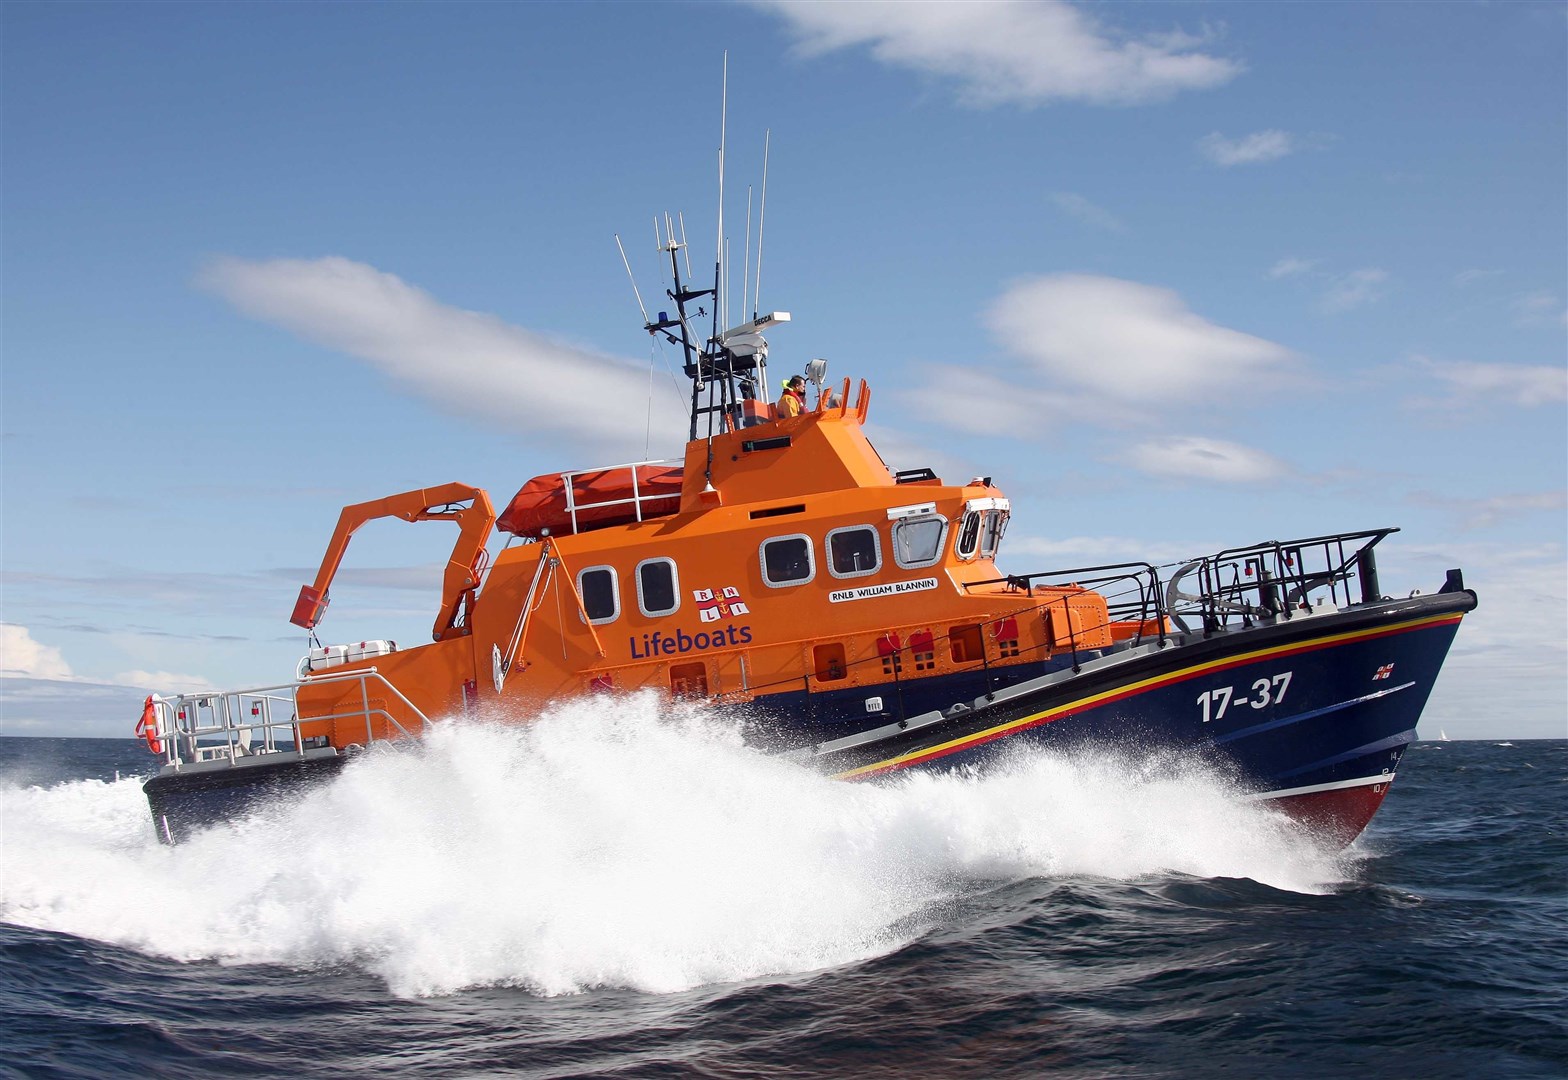 Buckie lifeboat was called out to help rescue the kayakers.